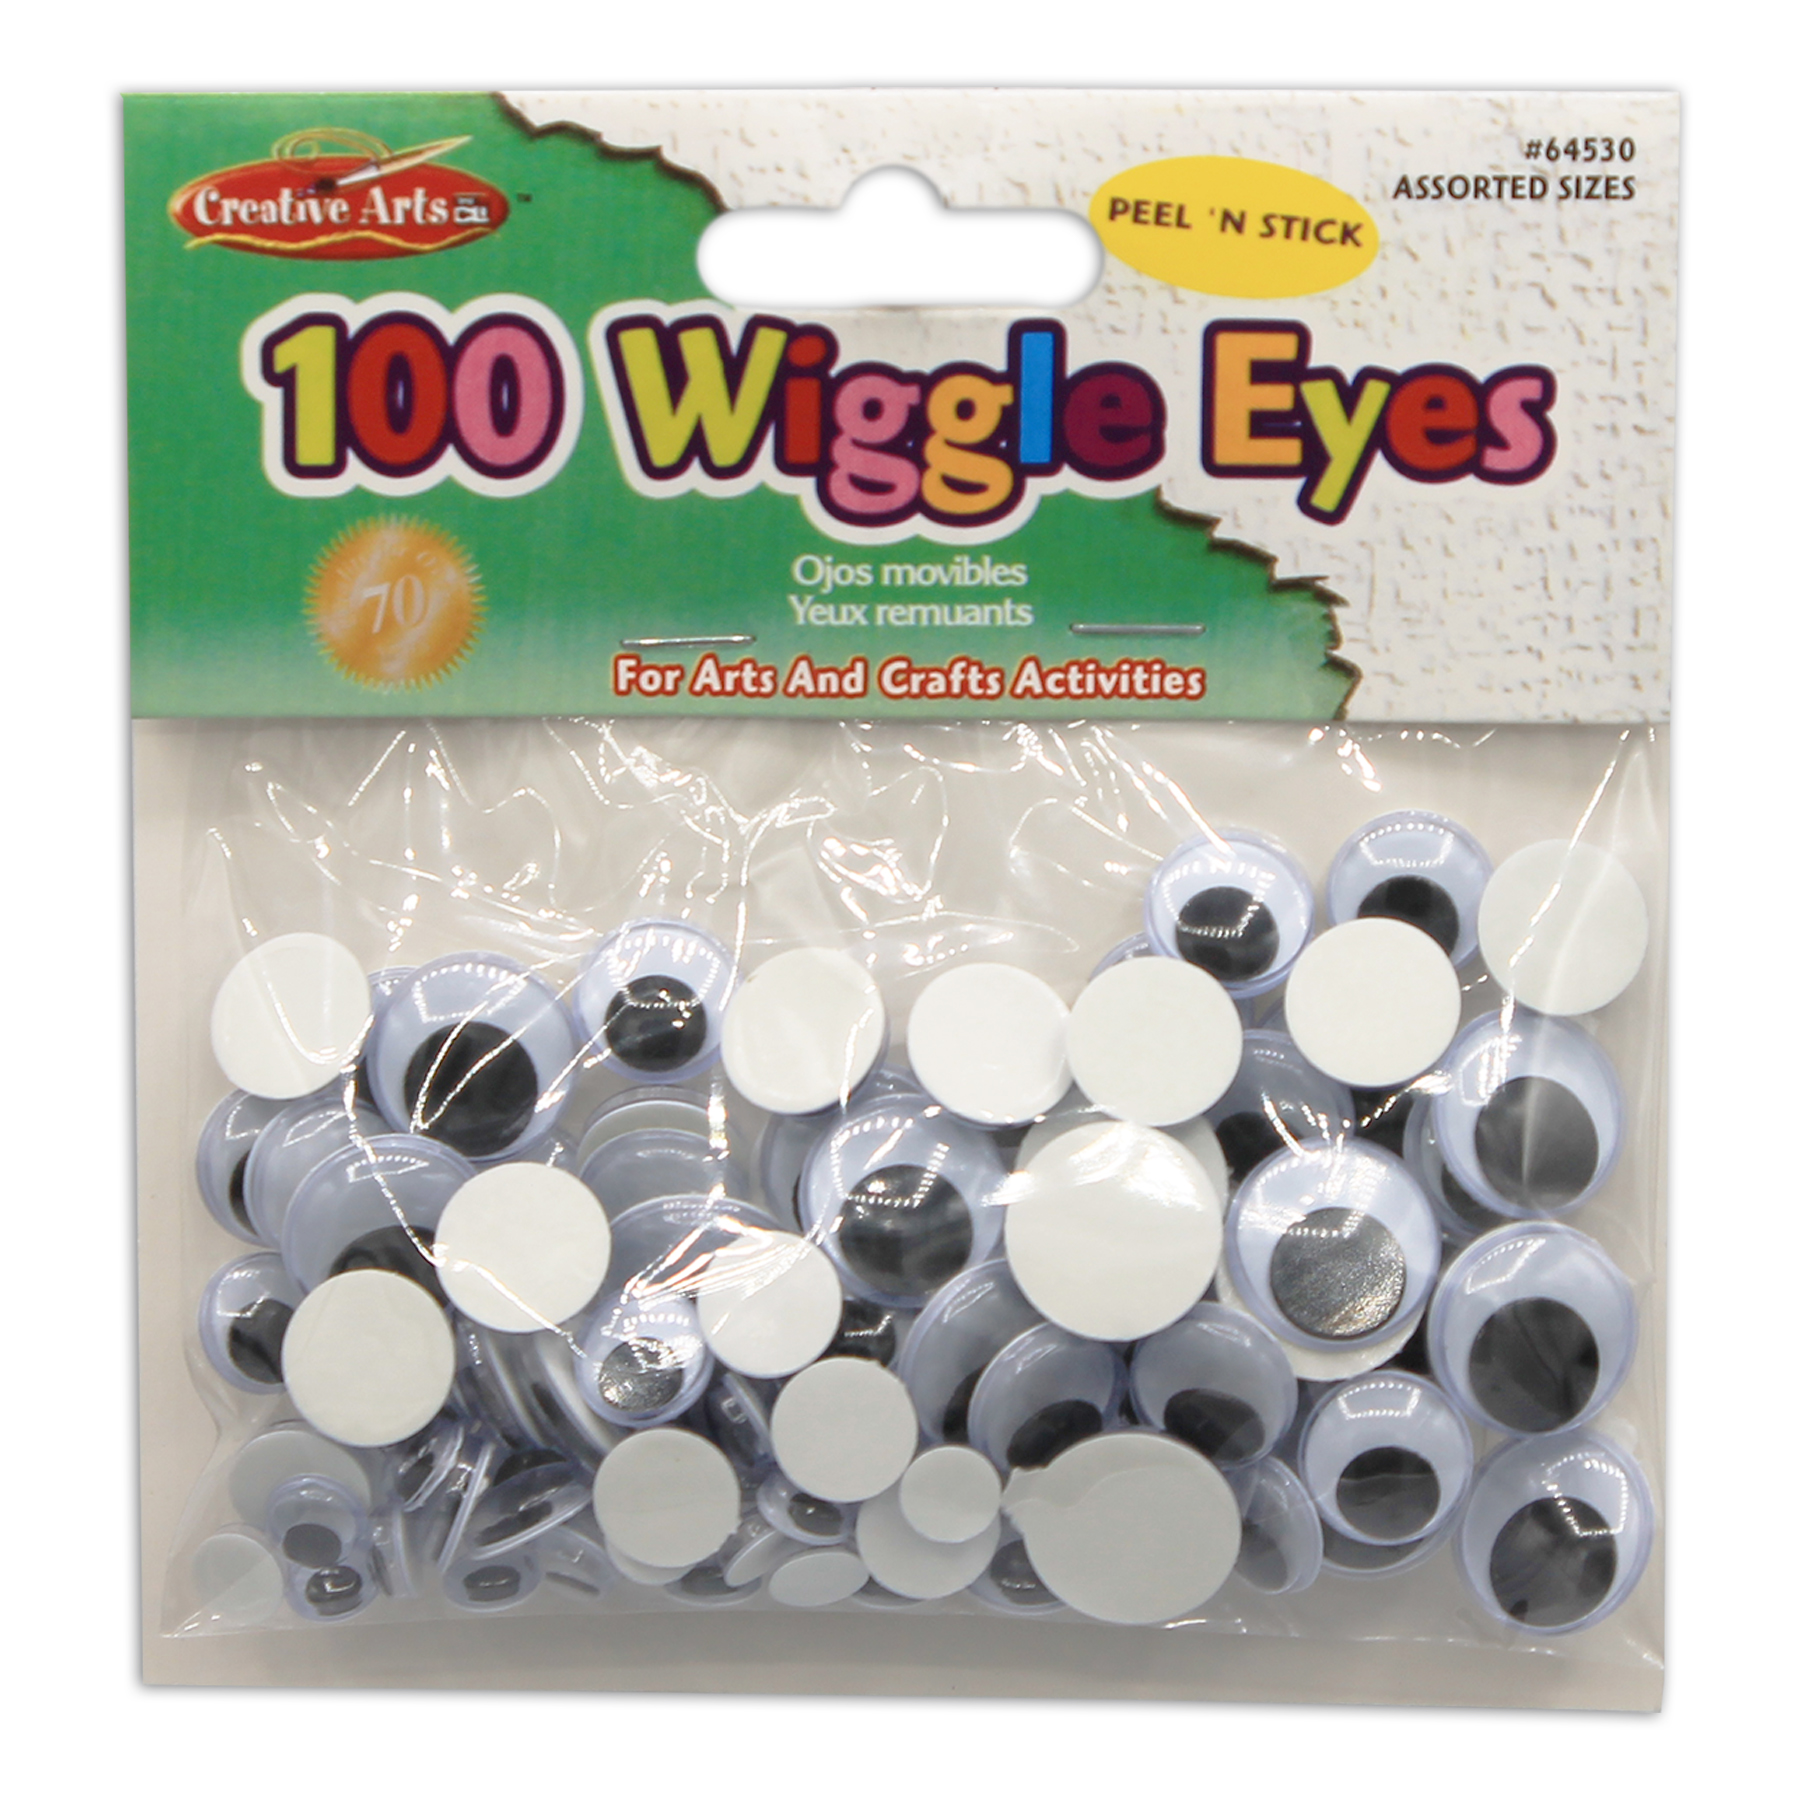 Creativity Street Wiggle Eyes, Multi-Color, Assorted Sizes, 100 per Pack, 6 Packs